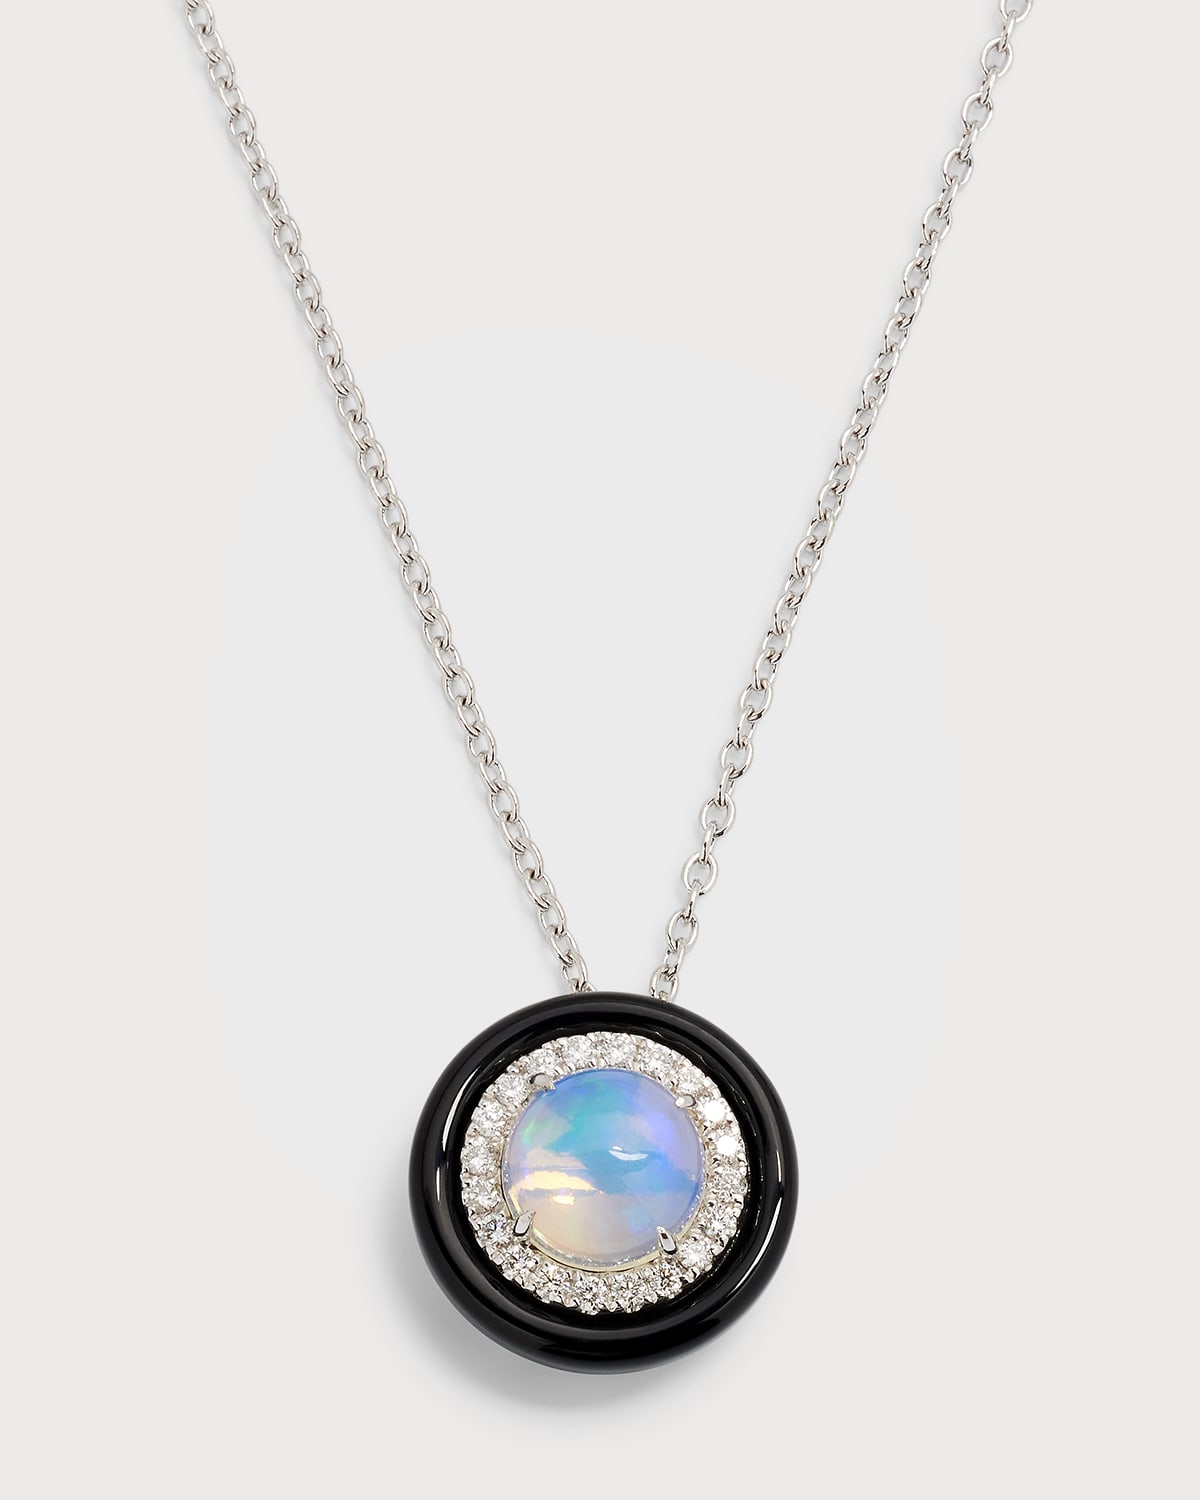 18K White Gold Pendant with Round Opal, Diamonds and Black Frame, 1.25tcw